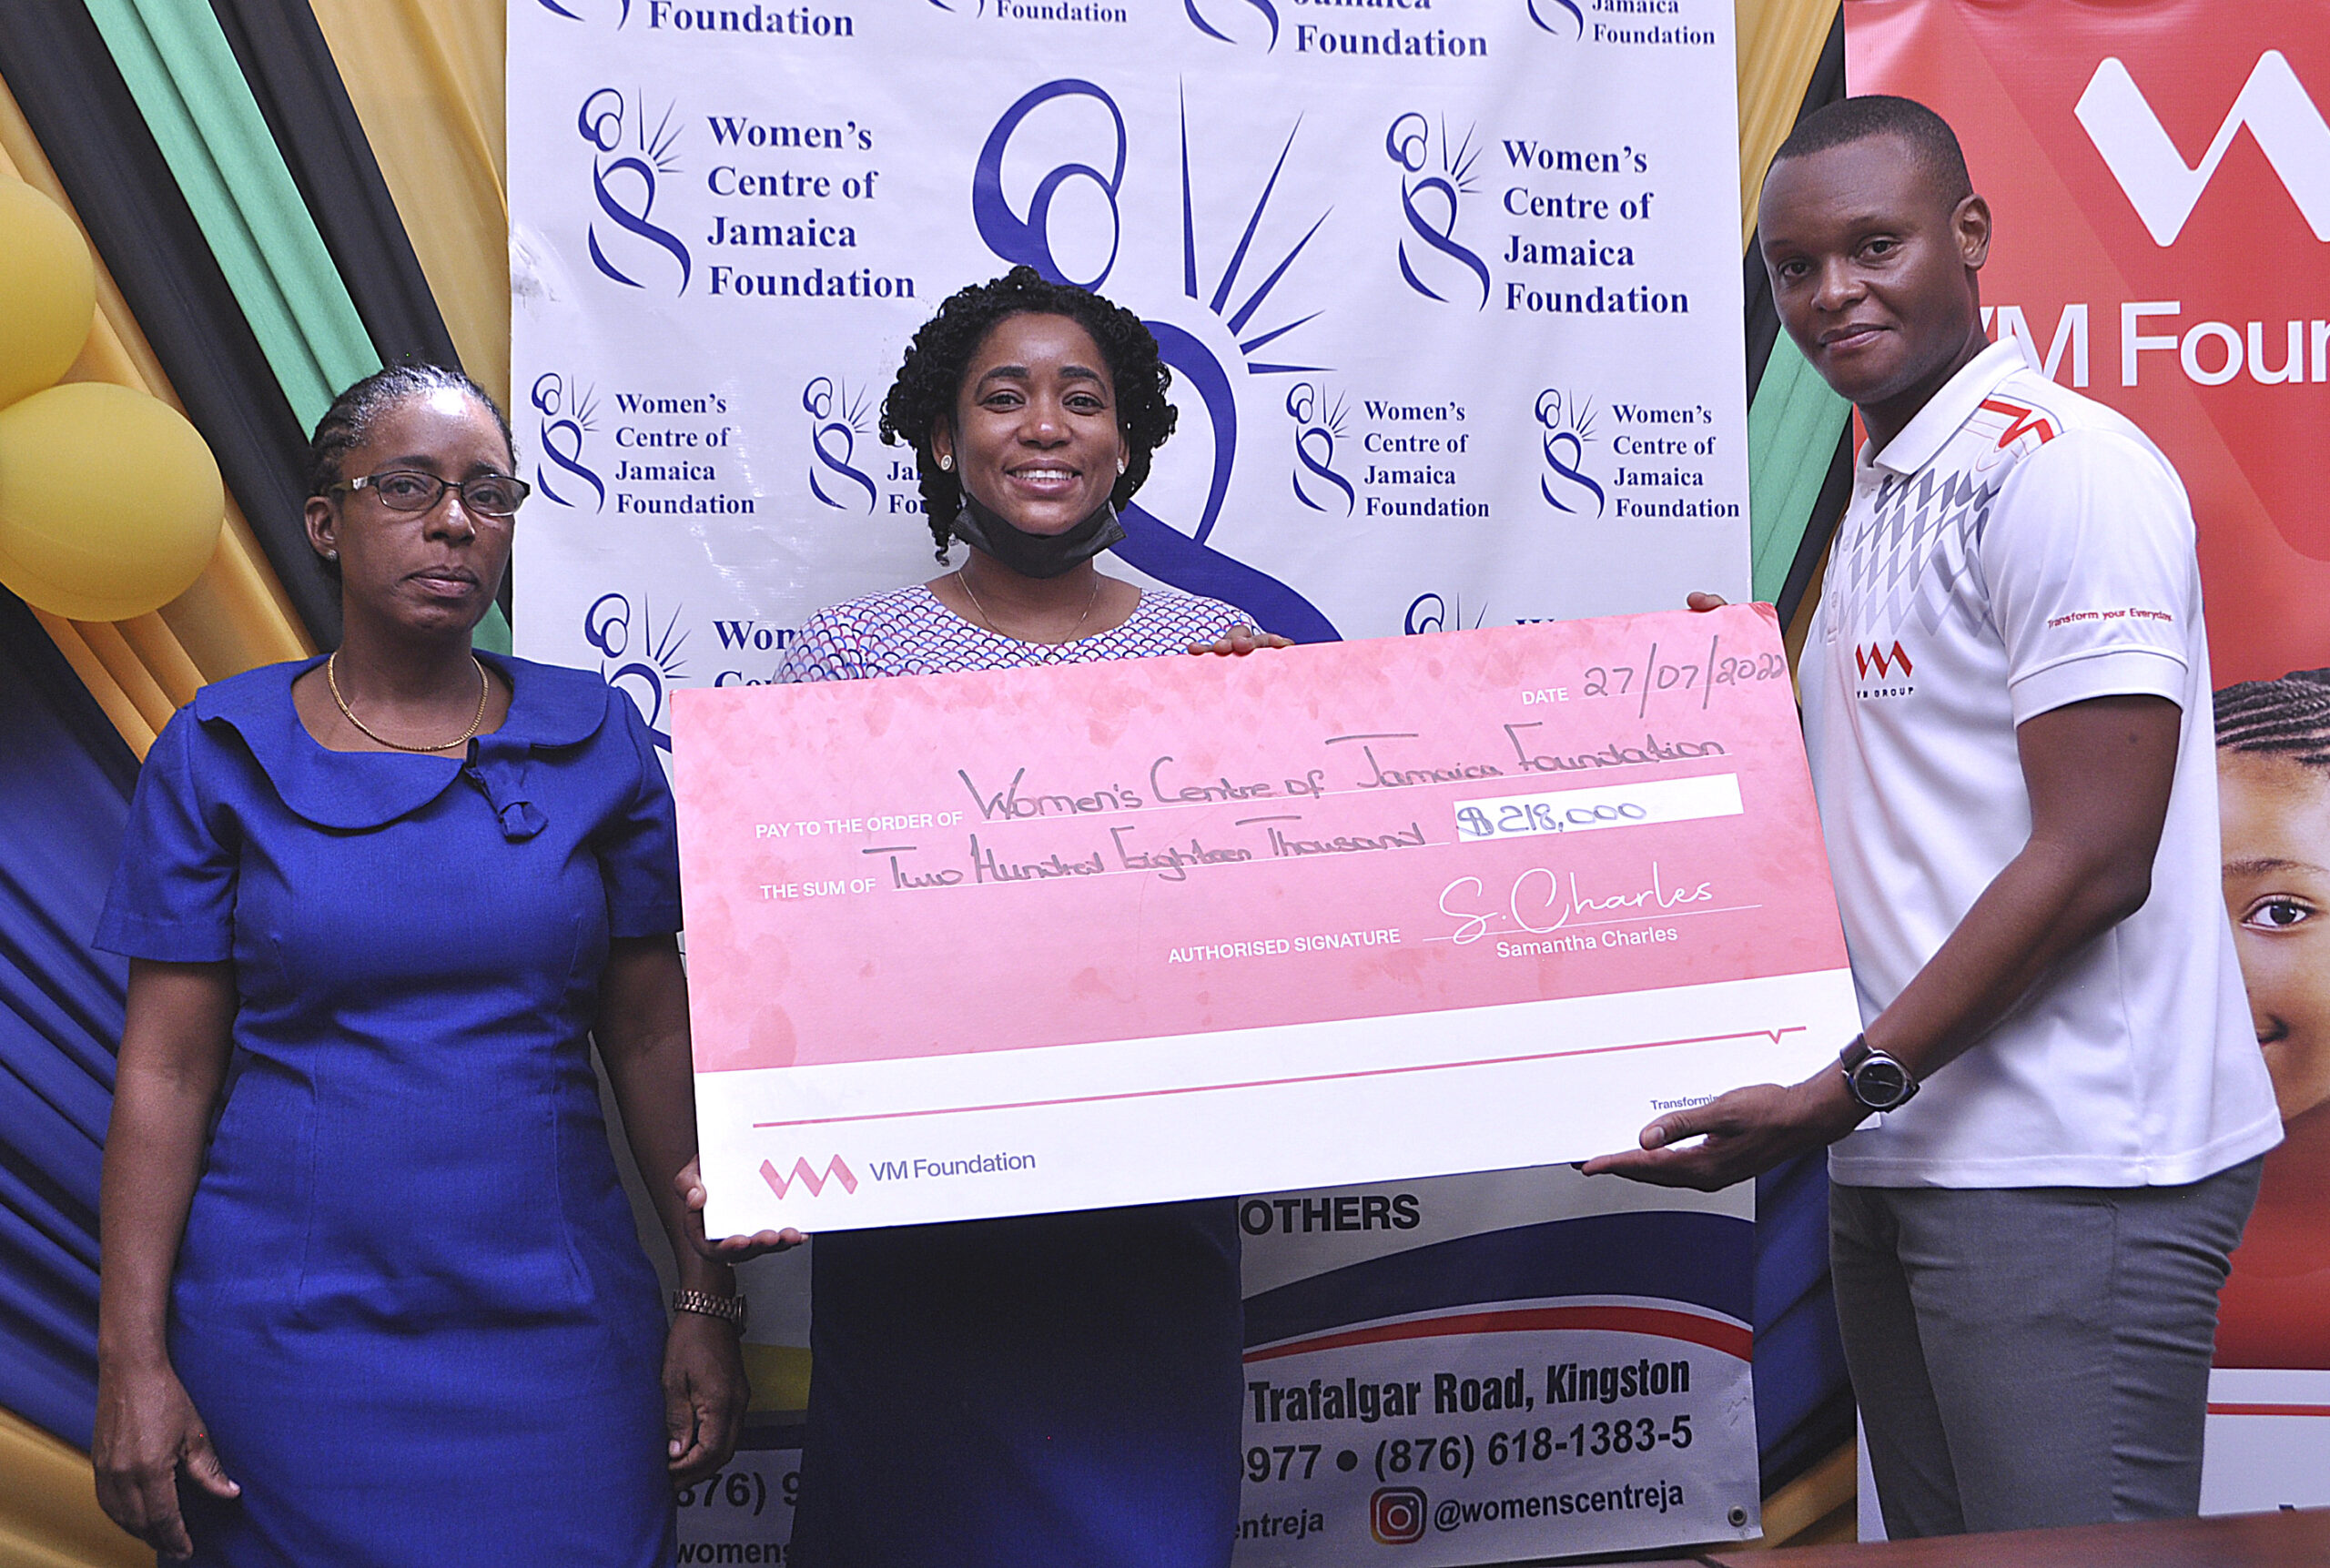 (From left)  Natalie Fuller, Projects Coordinator, and Marlene Murray-Brown, Counsellor at the Kingston Office of the Women’s Centre of Jamaica Foundation, receive a cheque courtesy of the VM Foundation. Making the presentation is Andre Alleyne, Assistant Supervisor for Customer Service at VM Building Society - New Kingston Branch.